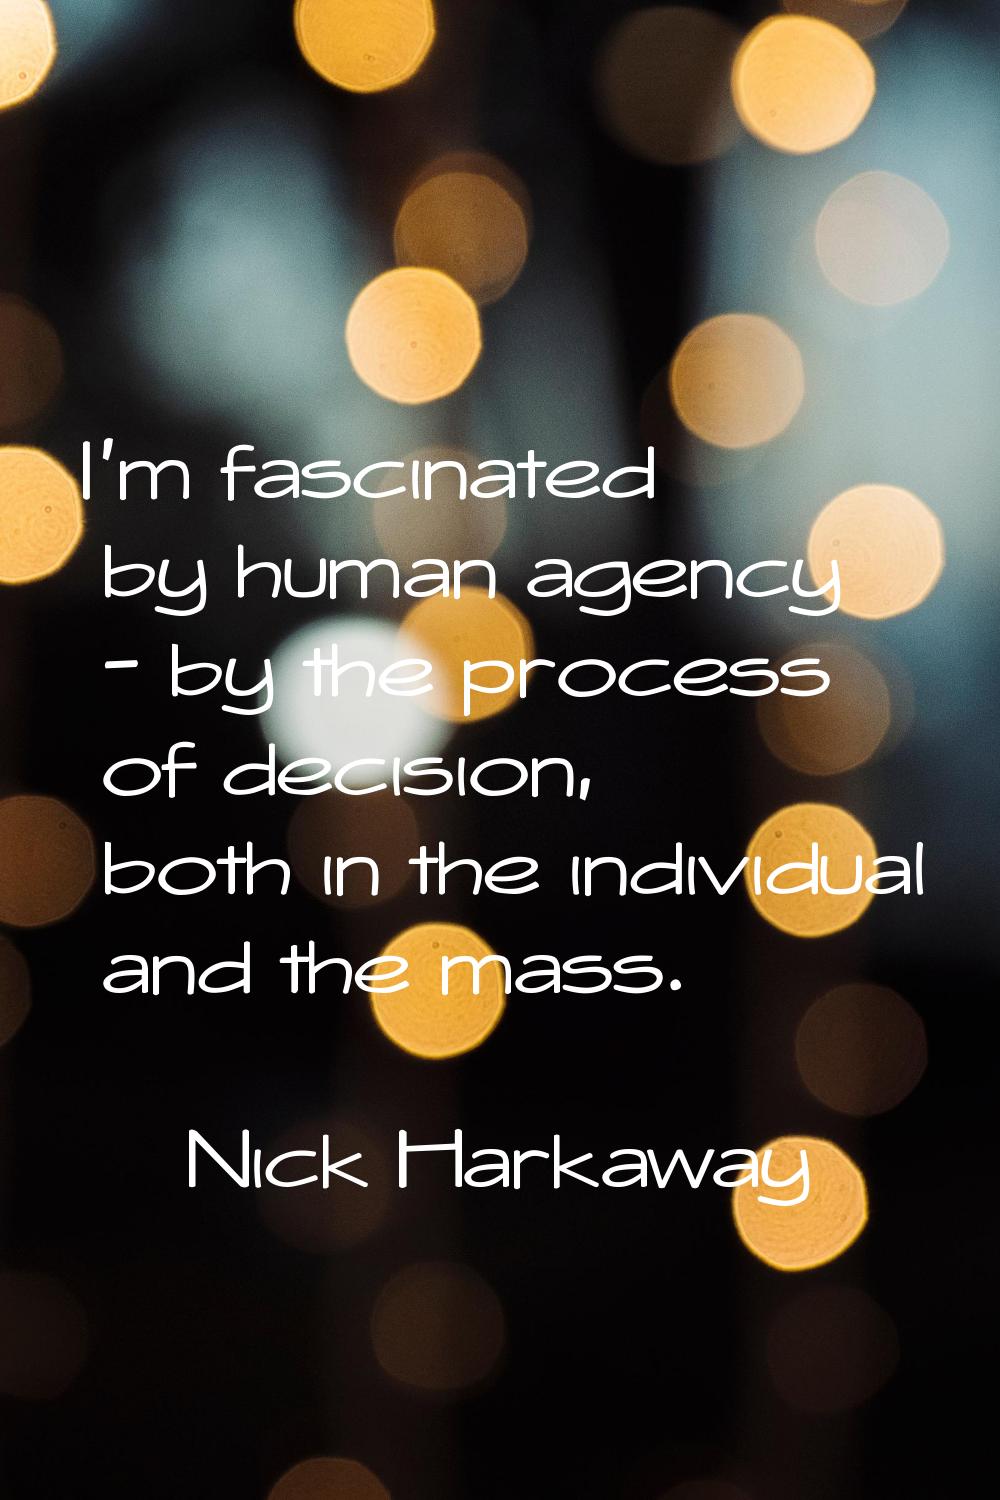 I'm fascinated by human agency - by the process of decision, both in the individual and the mass.